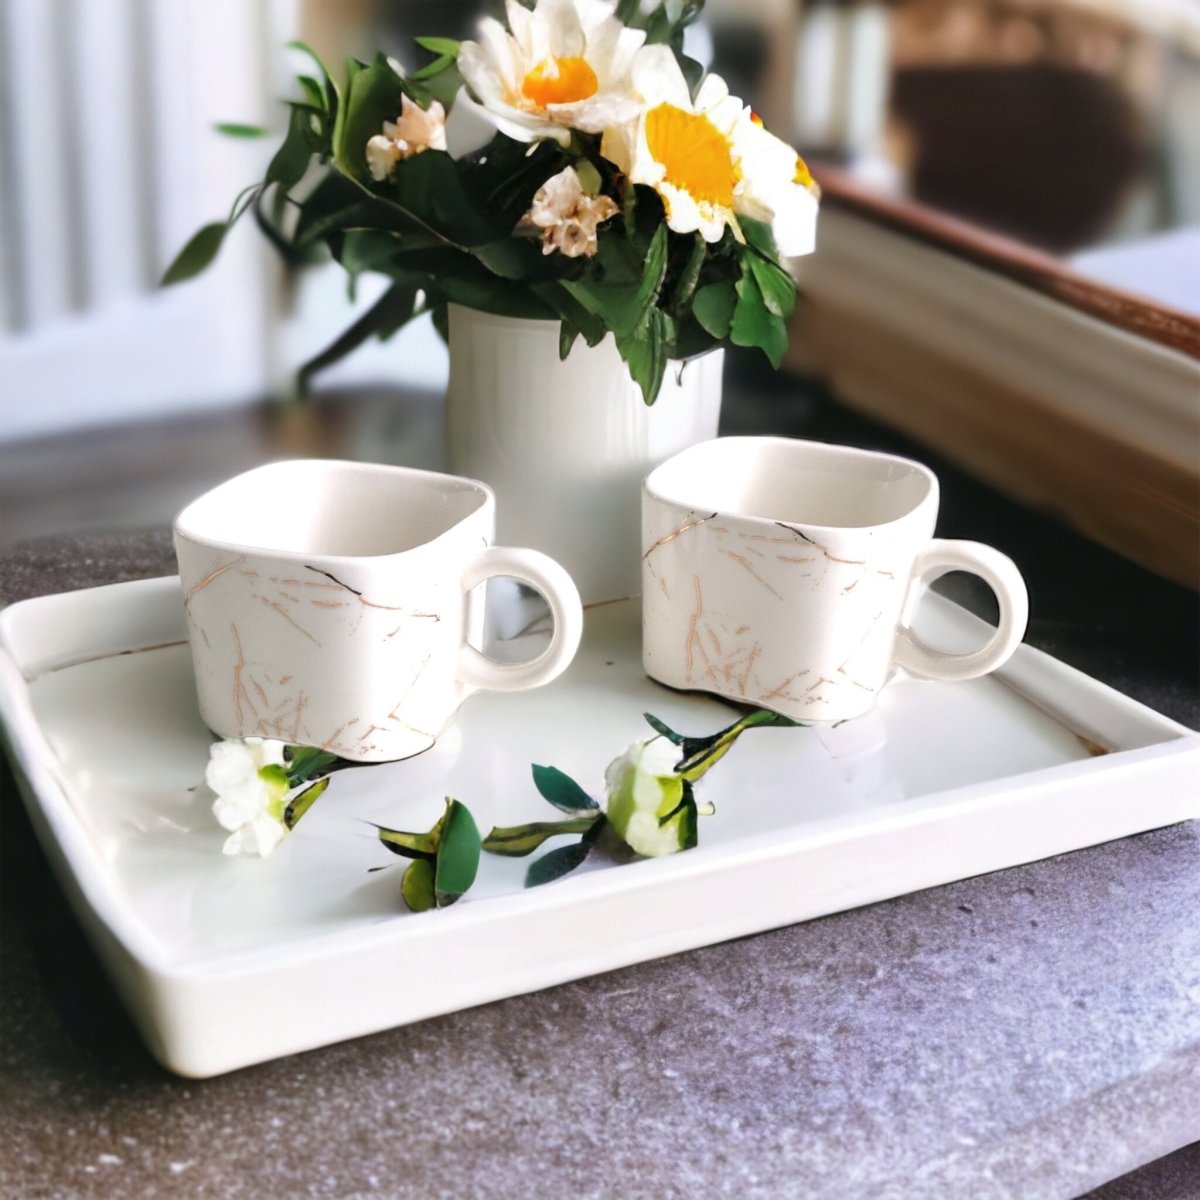 Porcelain Cups White and Gold Marble Finish - Elegant Square Shaped 6 Pcs Cup Set Serves as Tea Cups, Coffee Cups - Kezevel